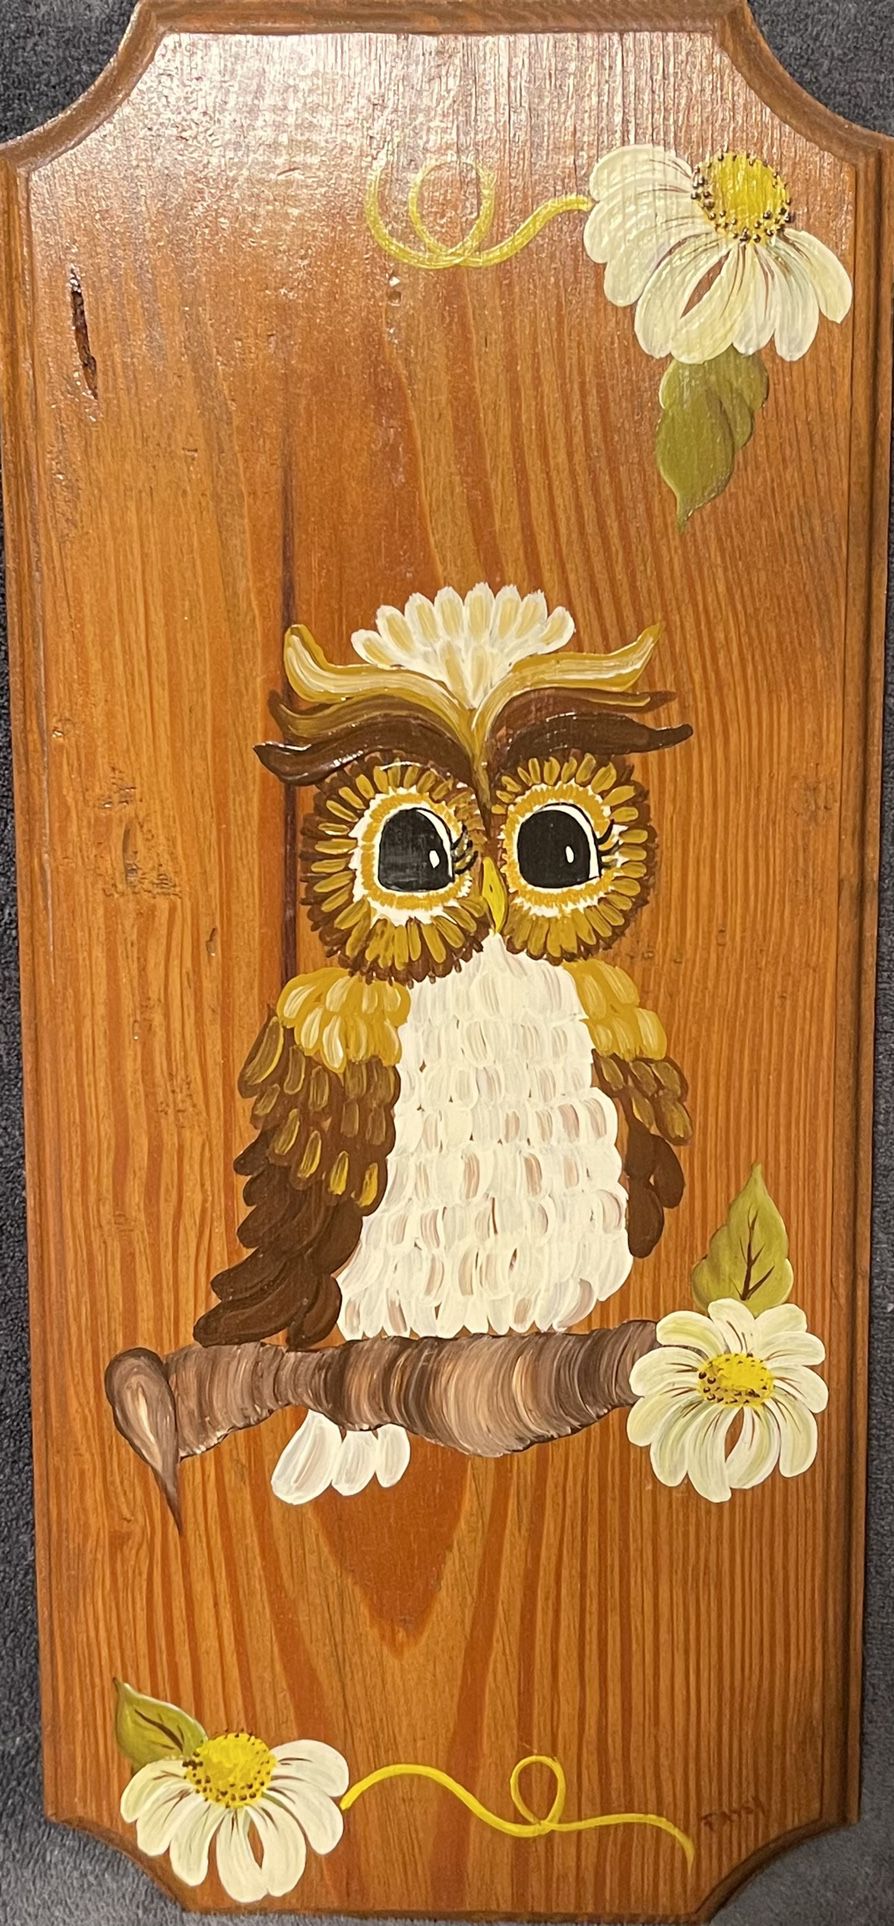 Vintage Hand-painted Owl Wooden Wall Hanging. 